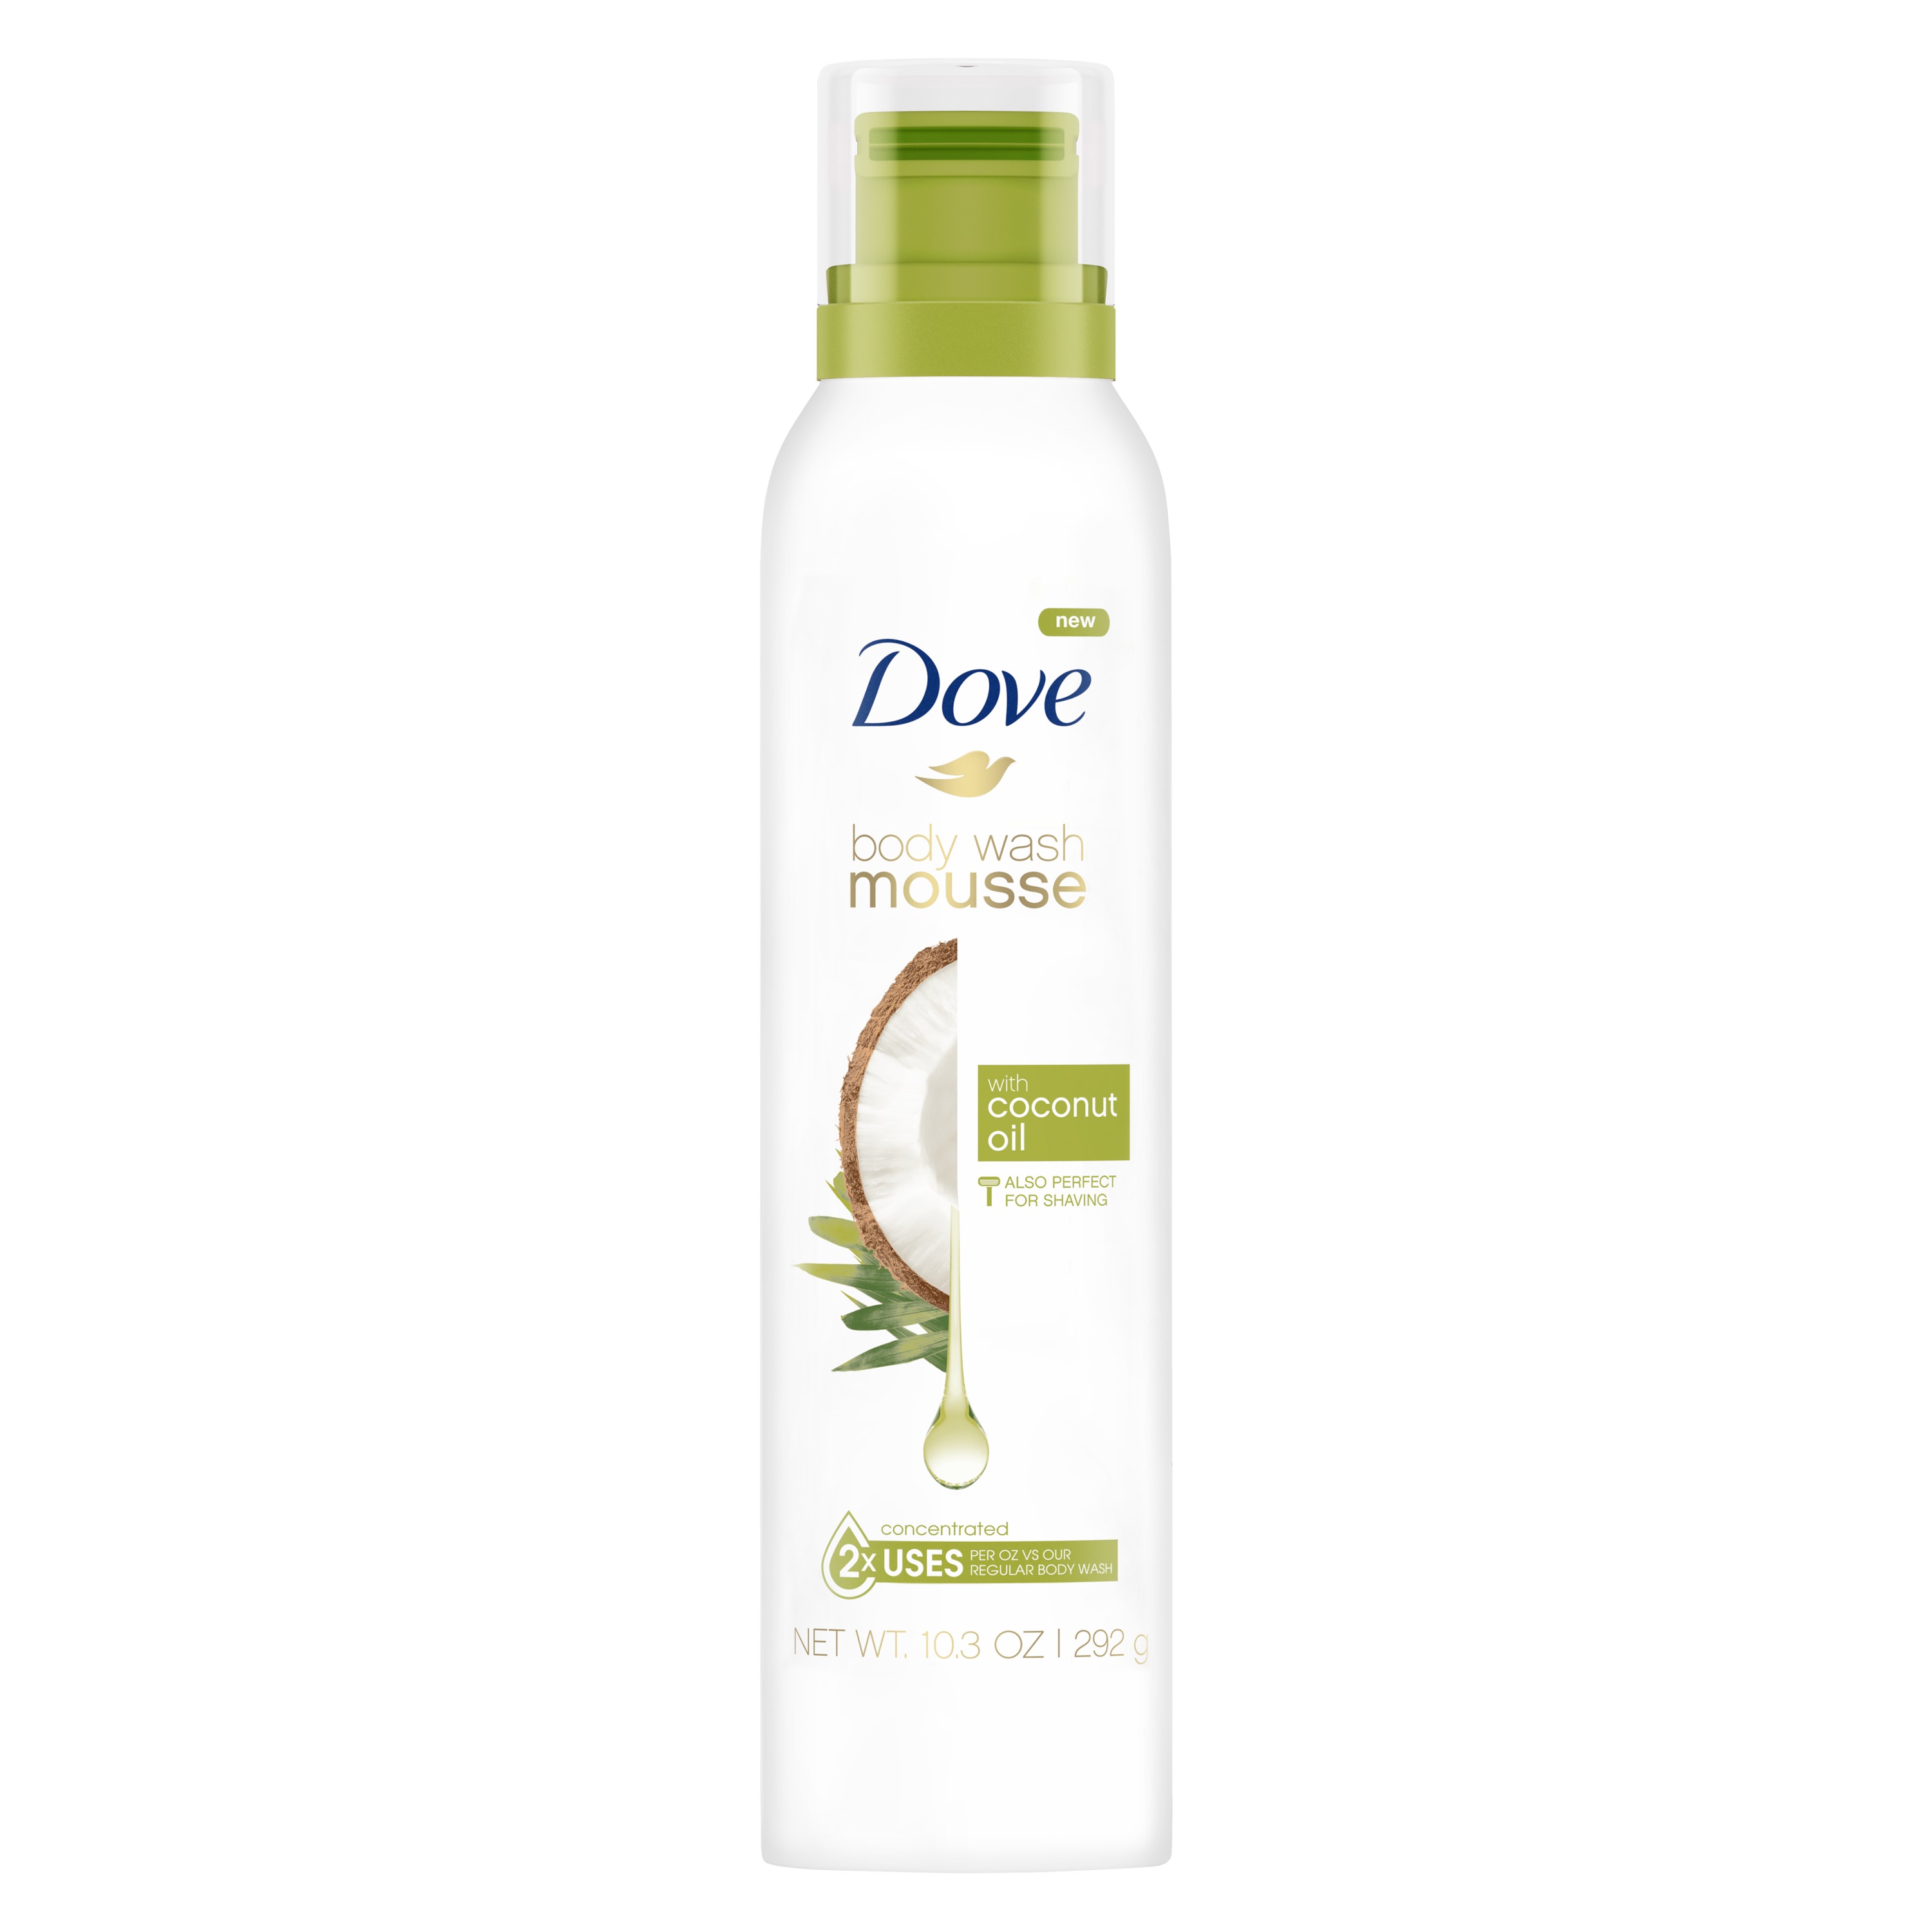 Dove Women's Body Wash Mousse with Sweet Coconut Oil All Skin, 10.3 oz - image 1 of 8